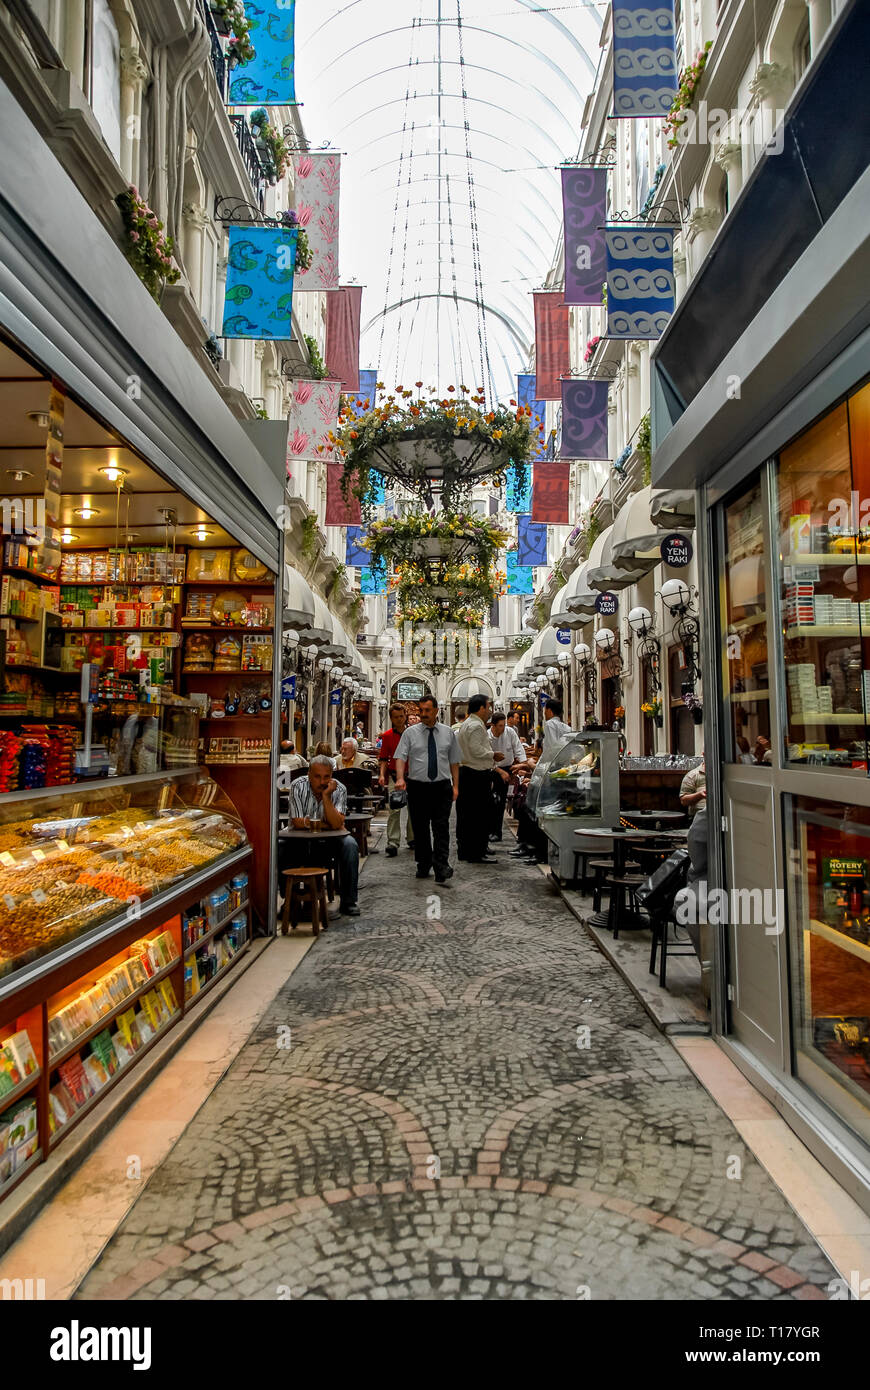 Istanbul, Turkey, 24 May 2006: Cite de Pera is a famous historic passage on Istiklal Avenue in the Beyoglu district. Stock Photo